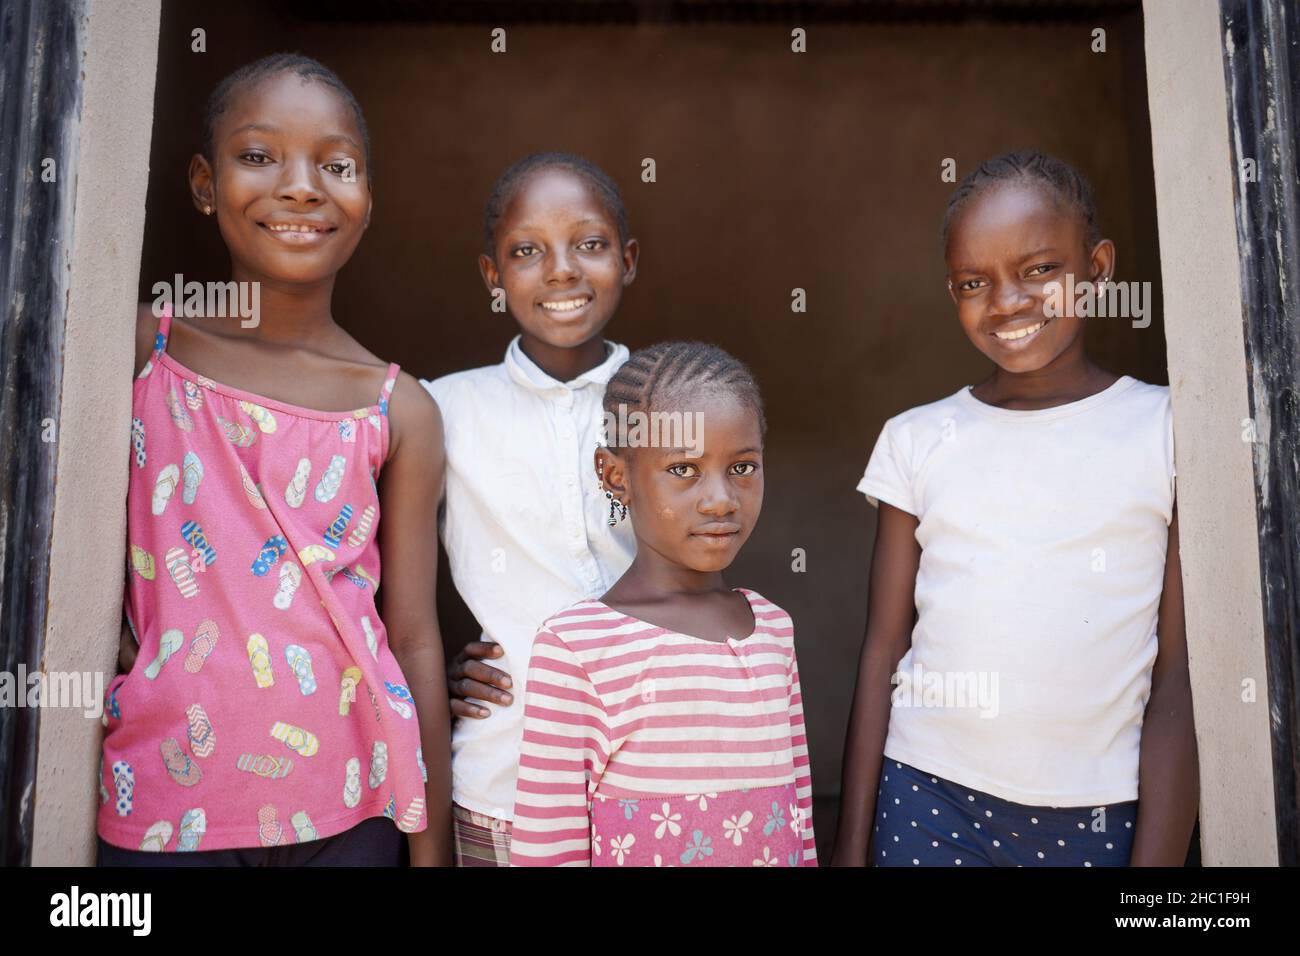 Group of four cool black African girls in casual clothes smiling at the camera and showing a relaxed and confident demeanor Stock Photo